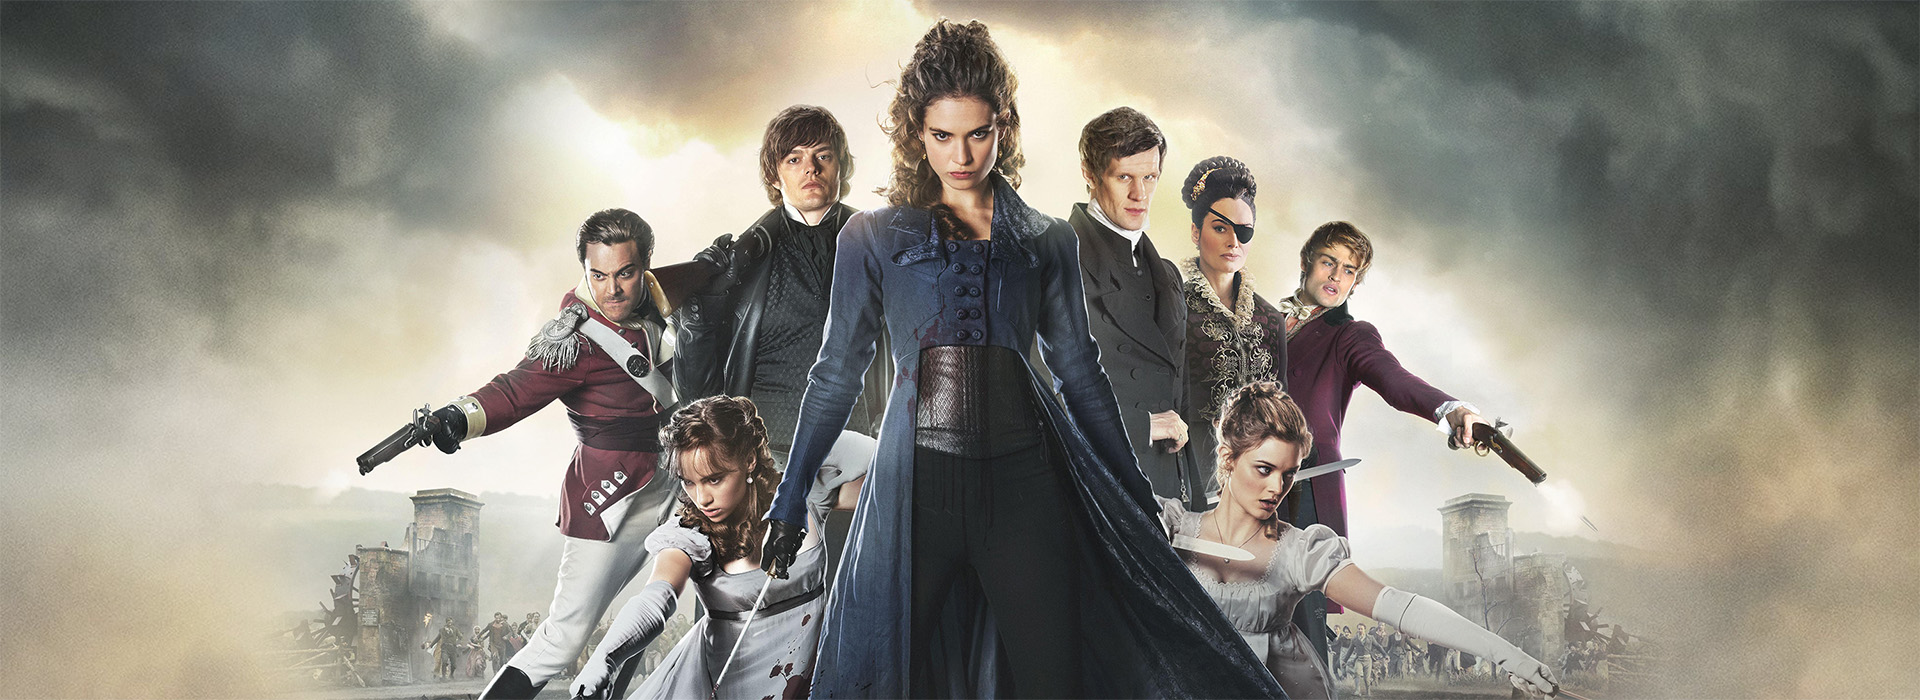 Movie poster Pride and Prejudice and Zombies